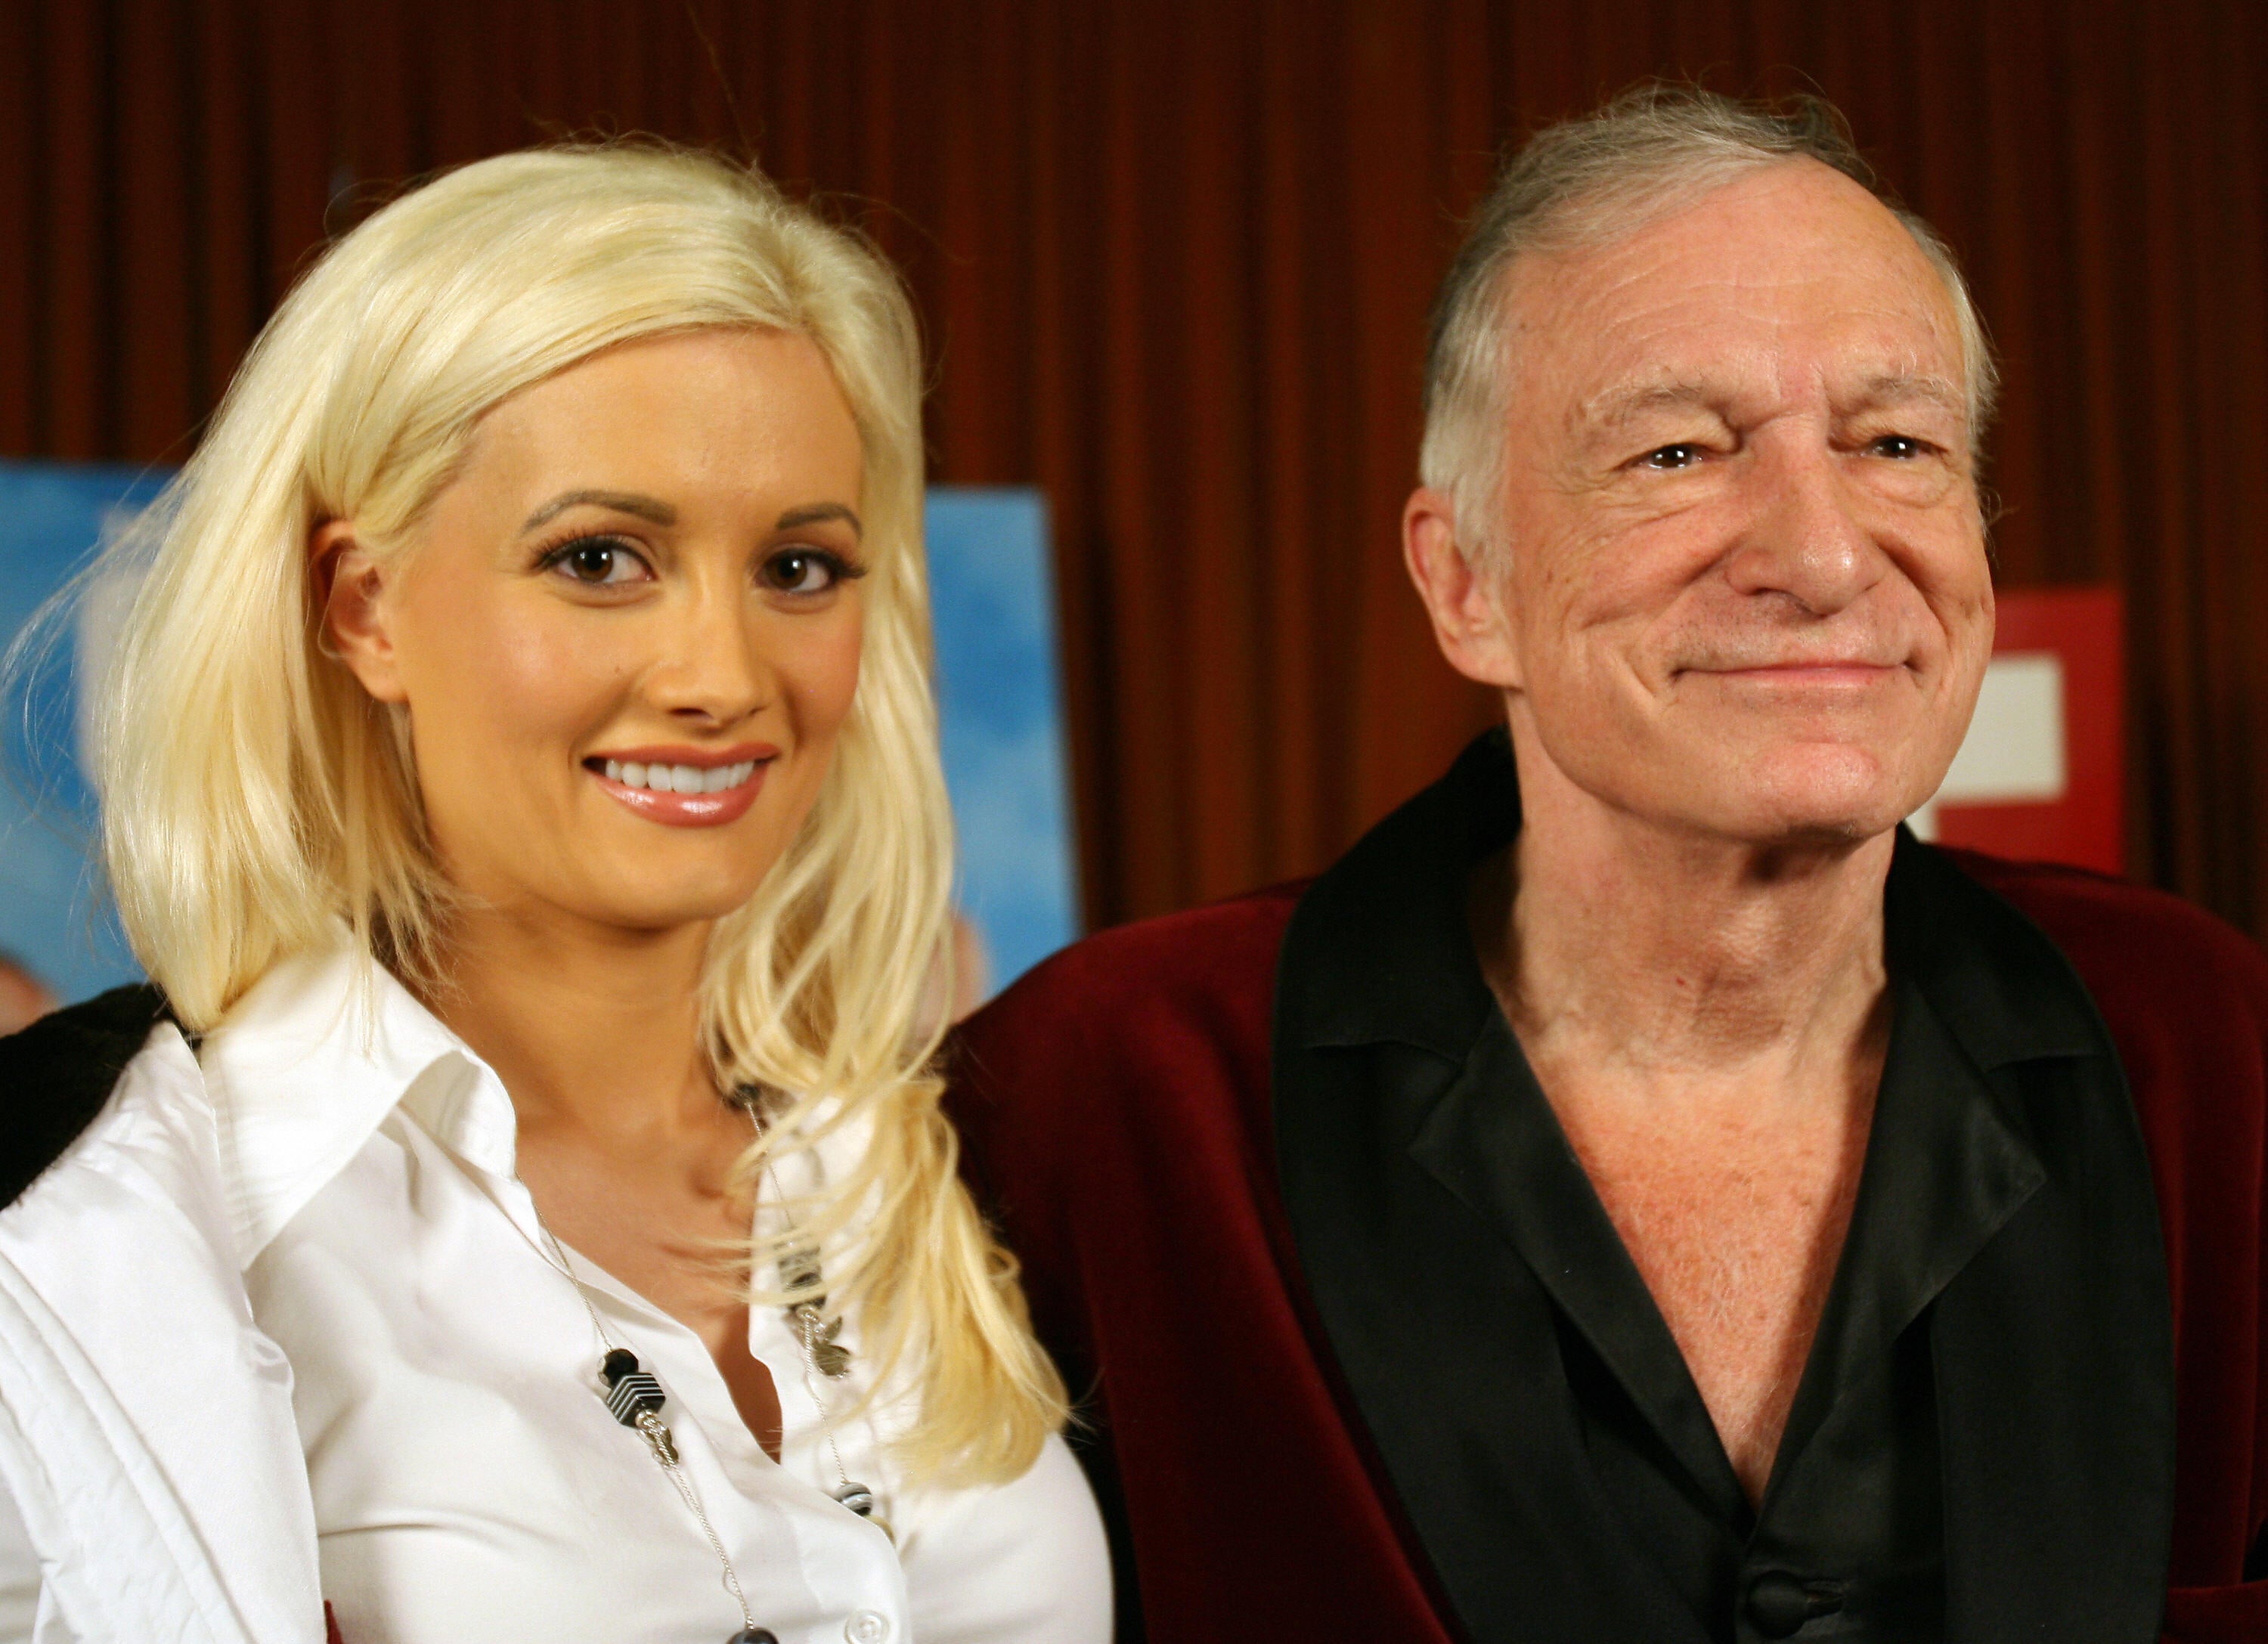 Hugh Hefner and Holly Madison during a press conference on 11 January 2007 at the Playboy mansion